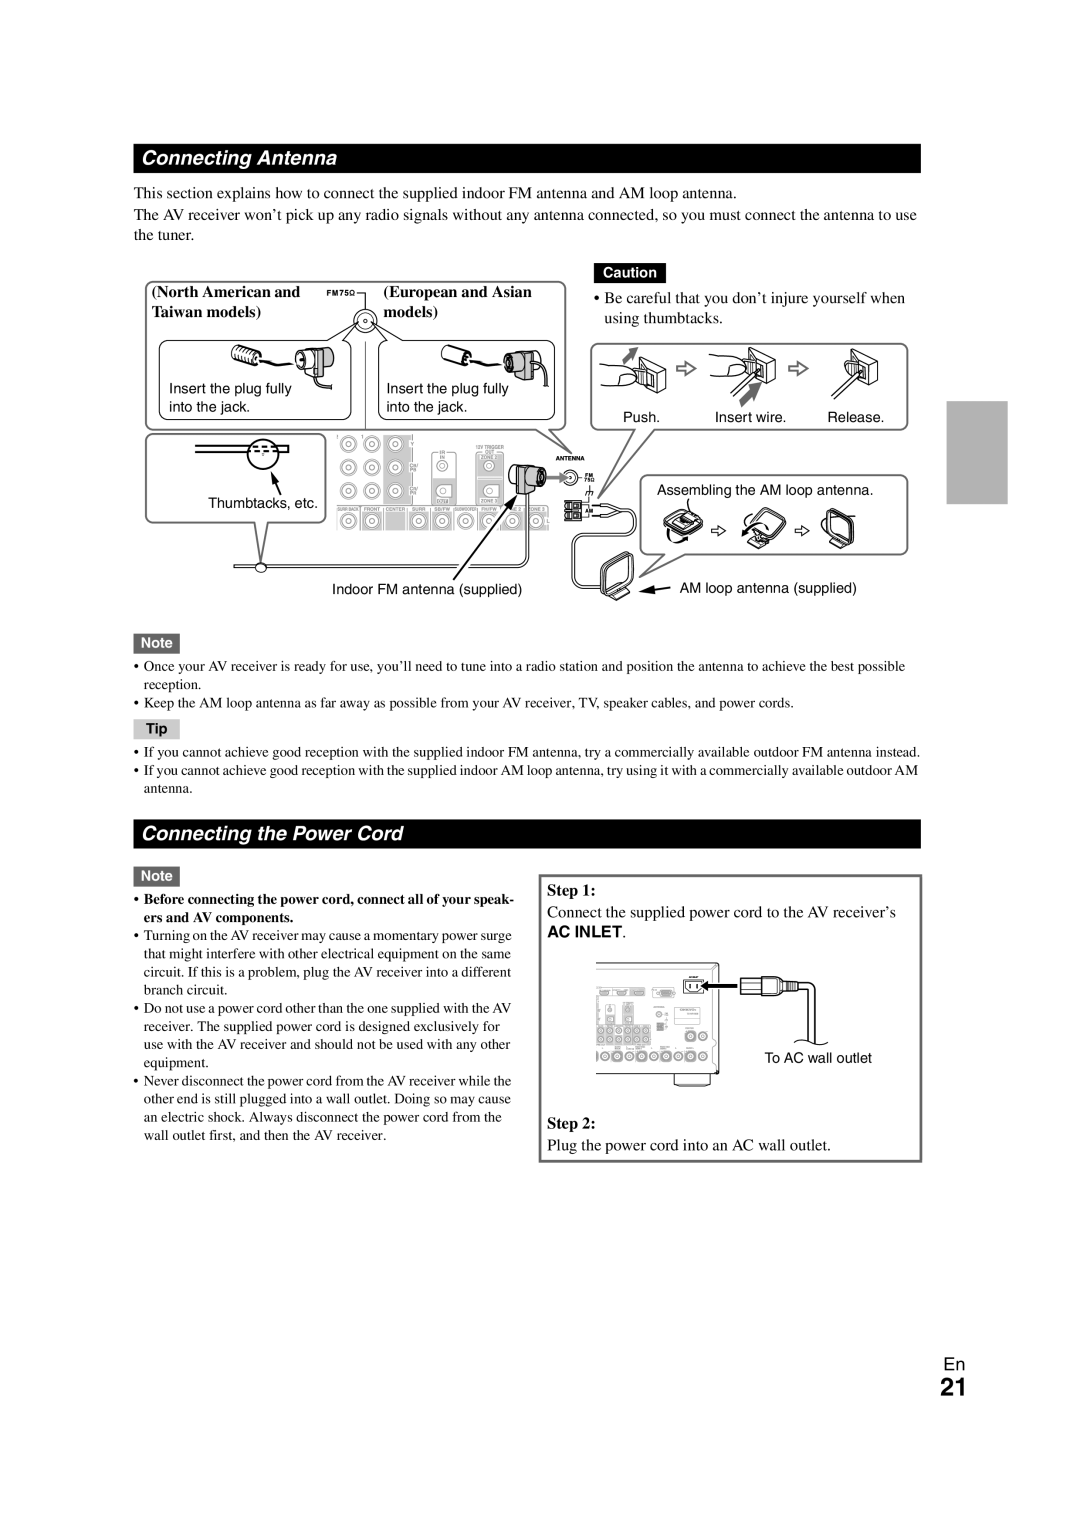 Onkyo TX-NR1008 instruction manual Connecting Antenna, Connecting the Power Cord, Ac Inlet 